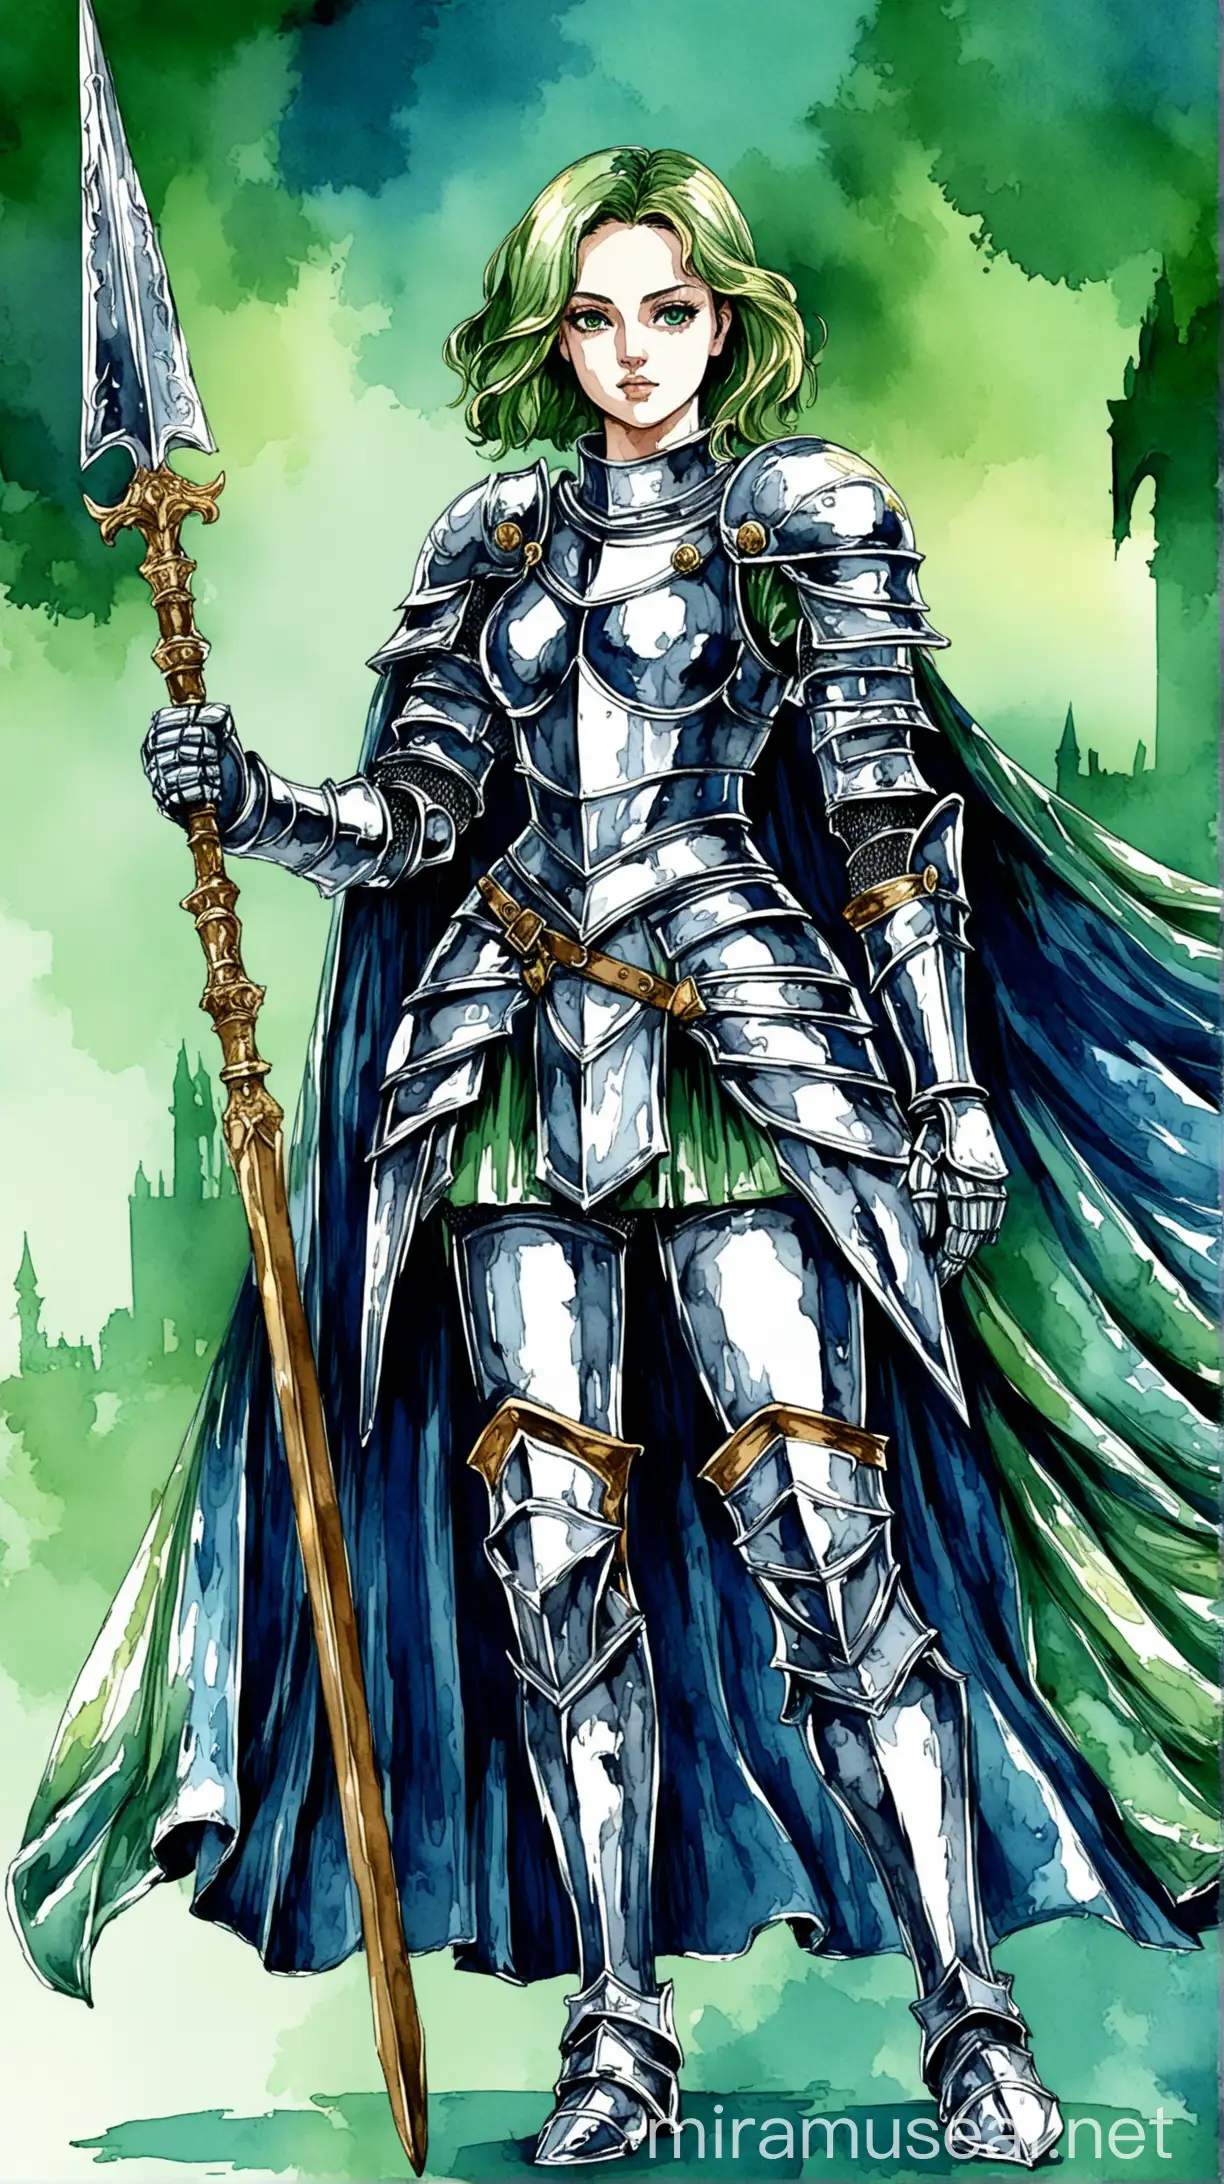 Subject: The central focus of the image is a beautiful and elegant female knight with a spear.
Background: dark blue-green background painted in watercolor
Style/Coloring: Colors adds depth and richness to the scene. Textures and shadows make the picture more detailed. JoJo reference.